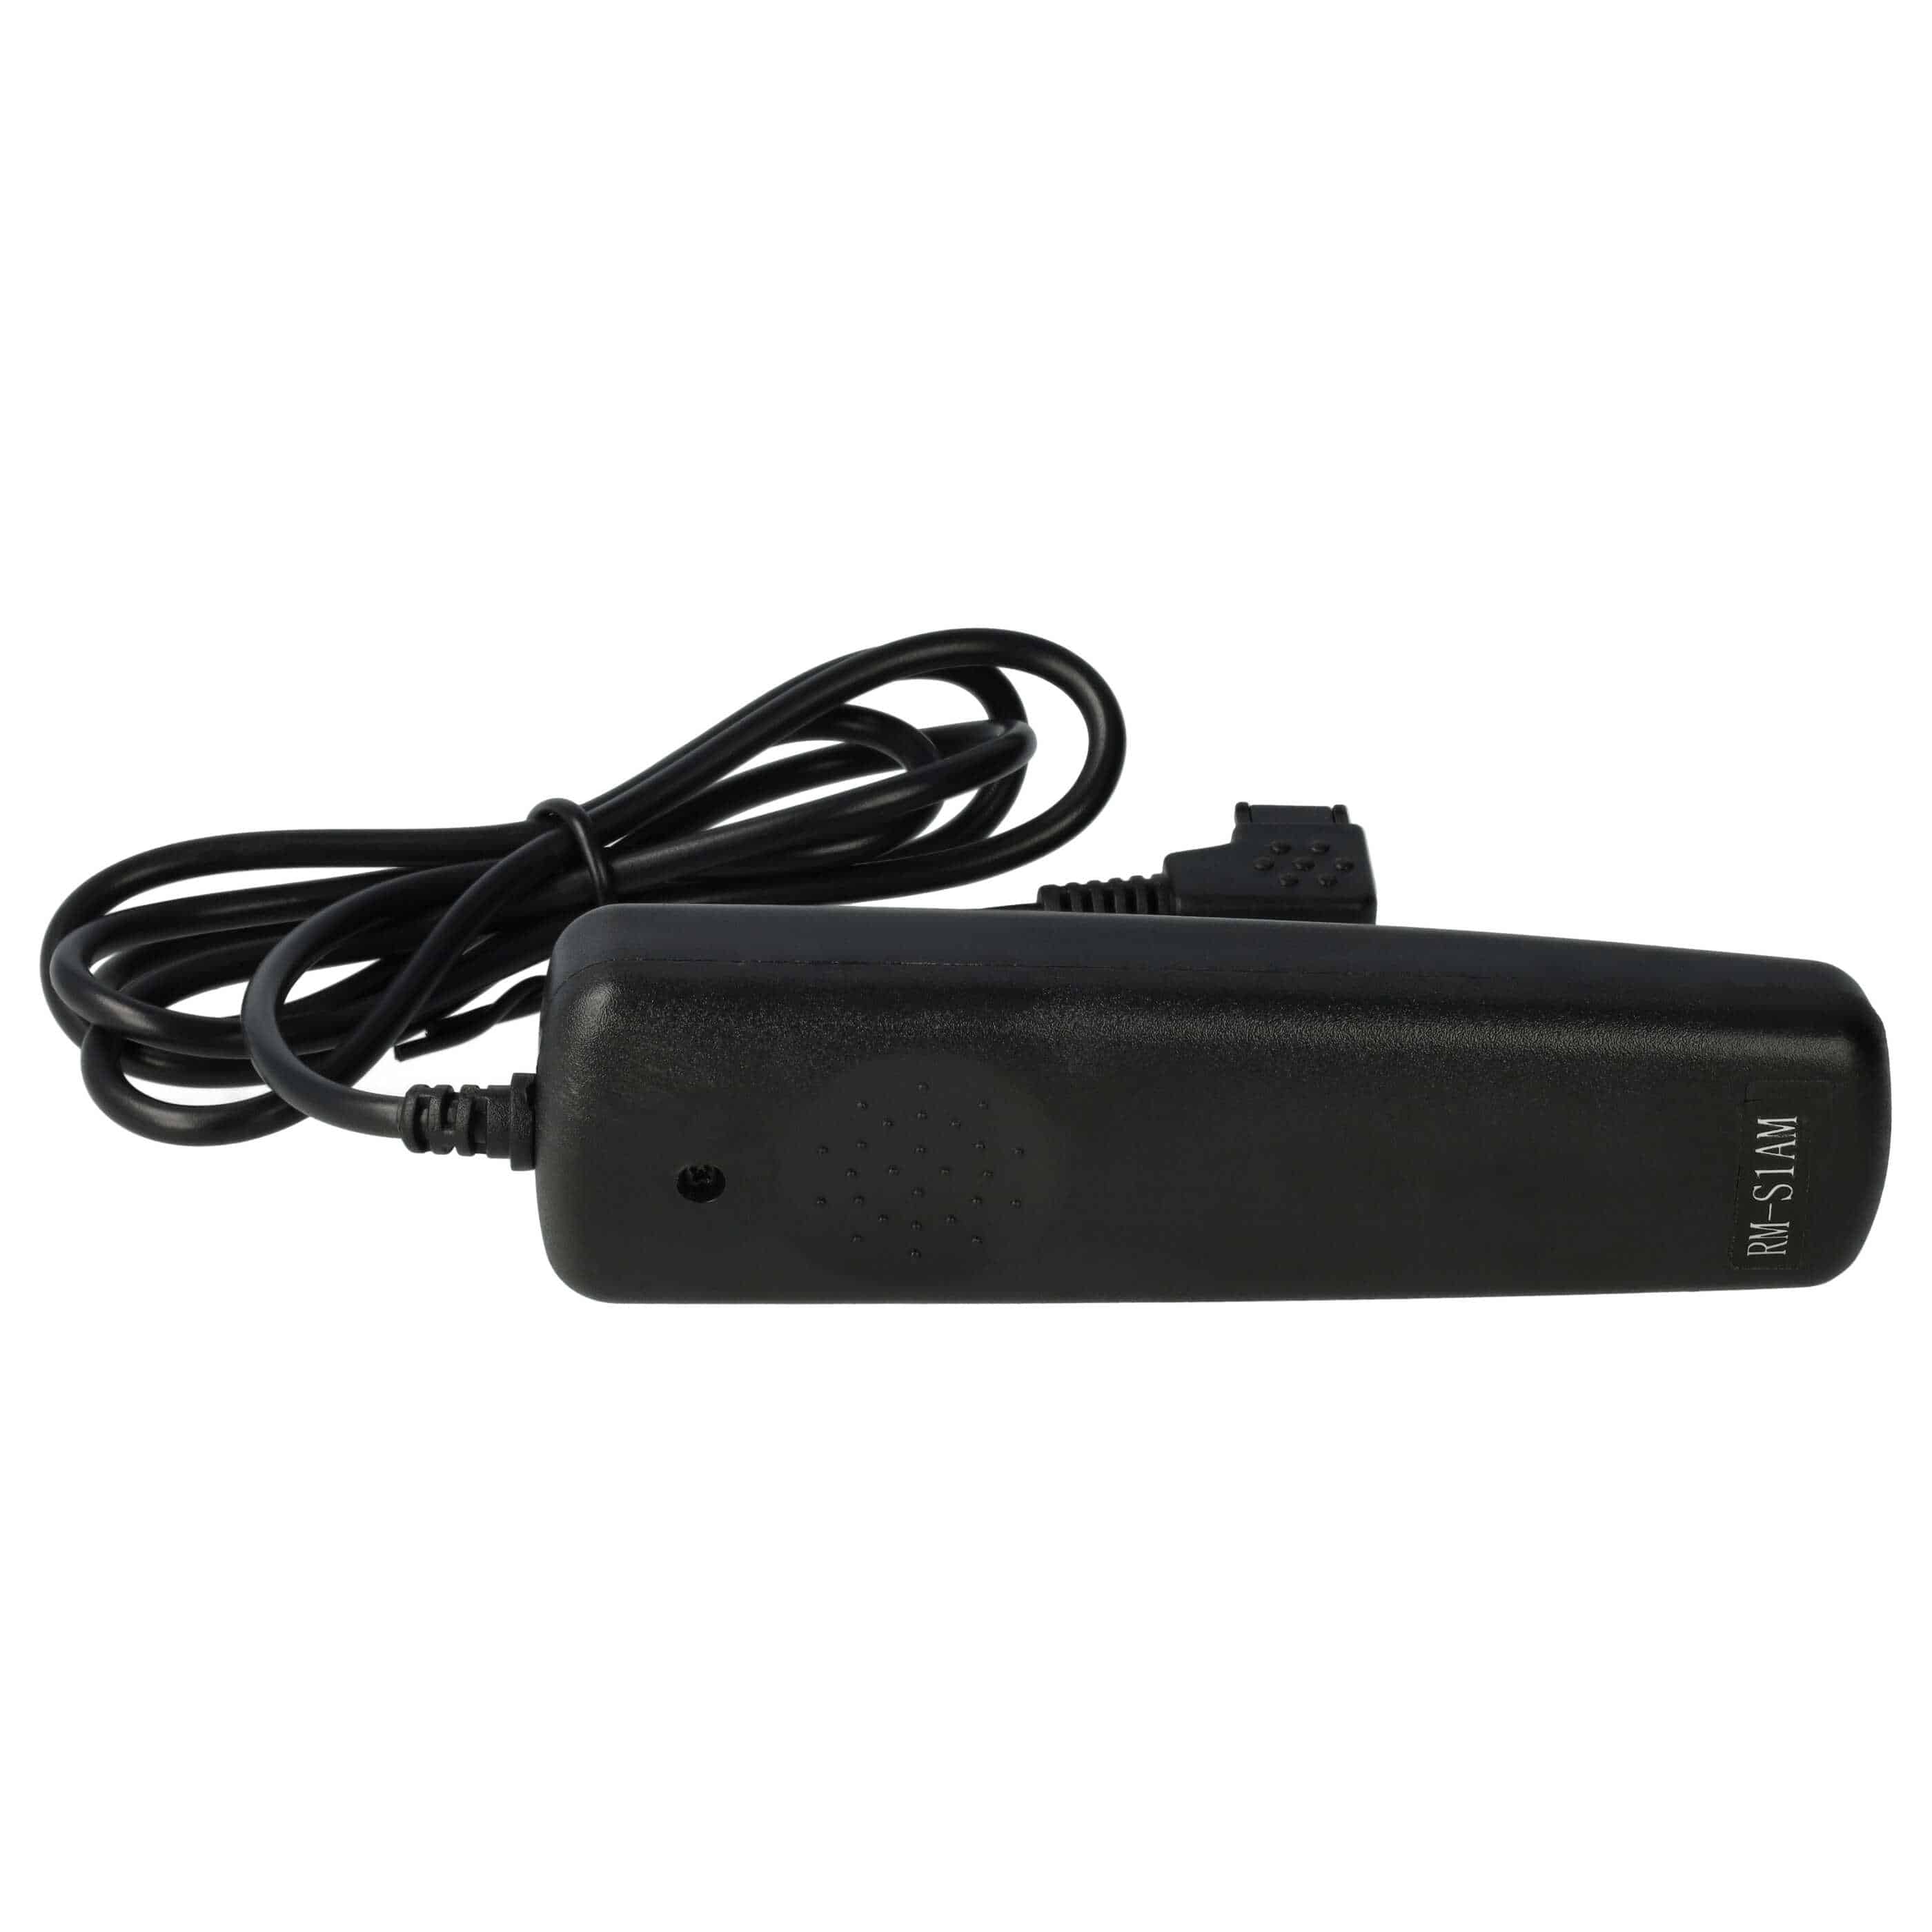 Remote Trigger as Exchange for Konica Minolta RC-1000L for Camera etc. 2-Step Shutter, 1 m Lead